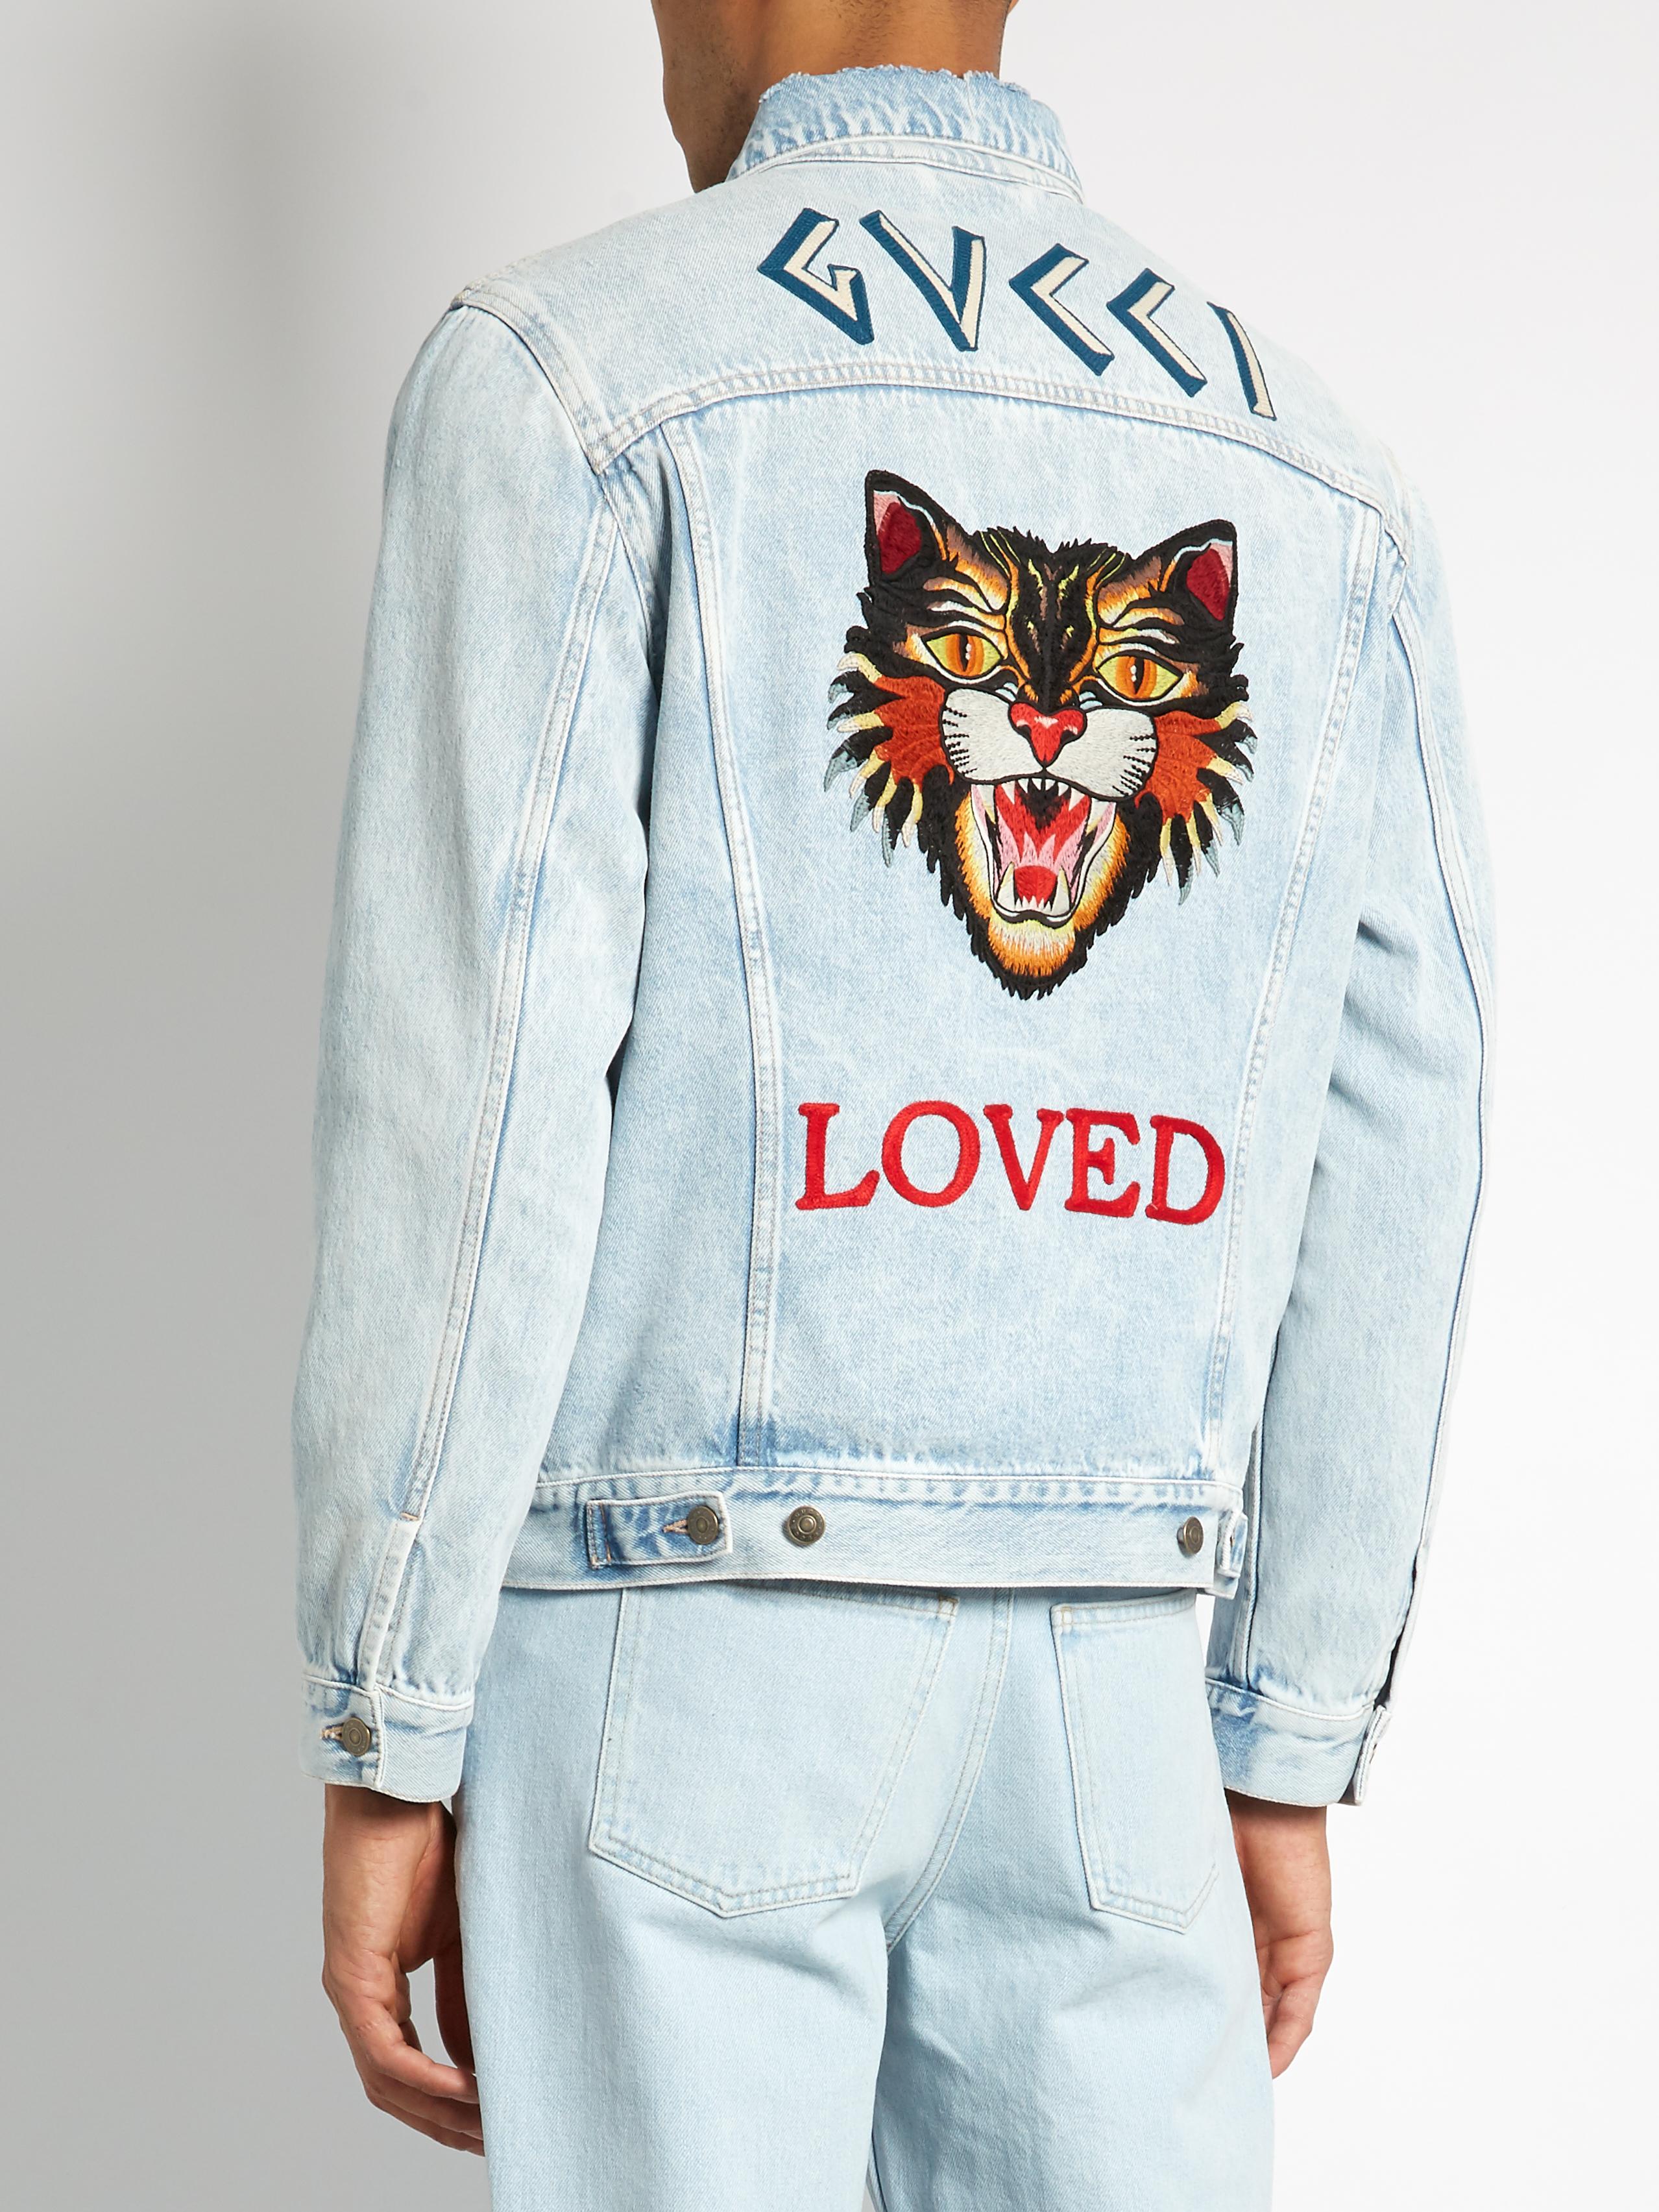 Gucci Loved-embroidered Denim Jacket in 